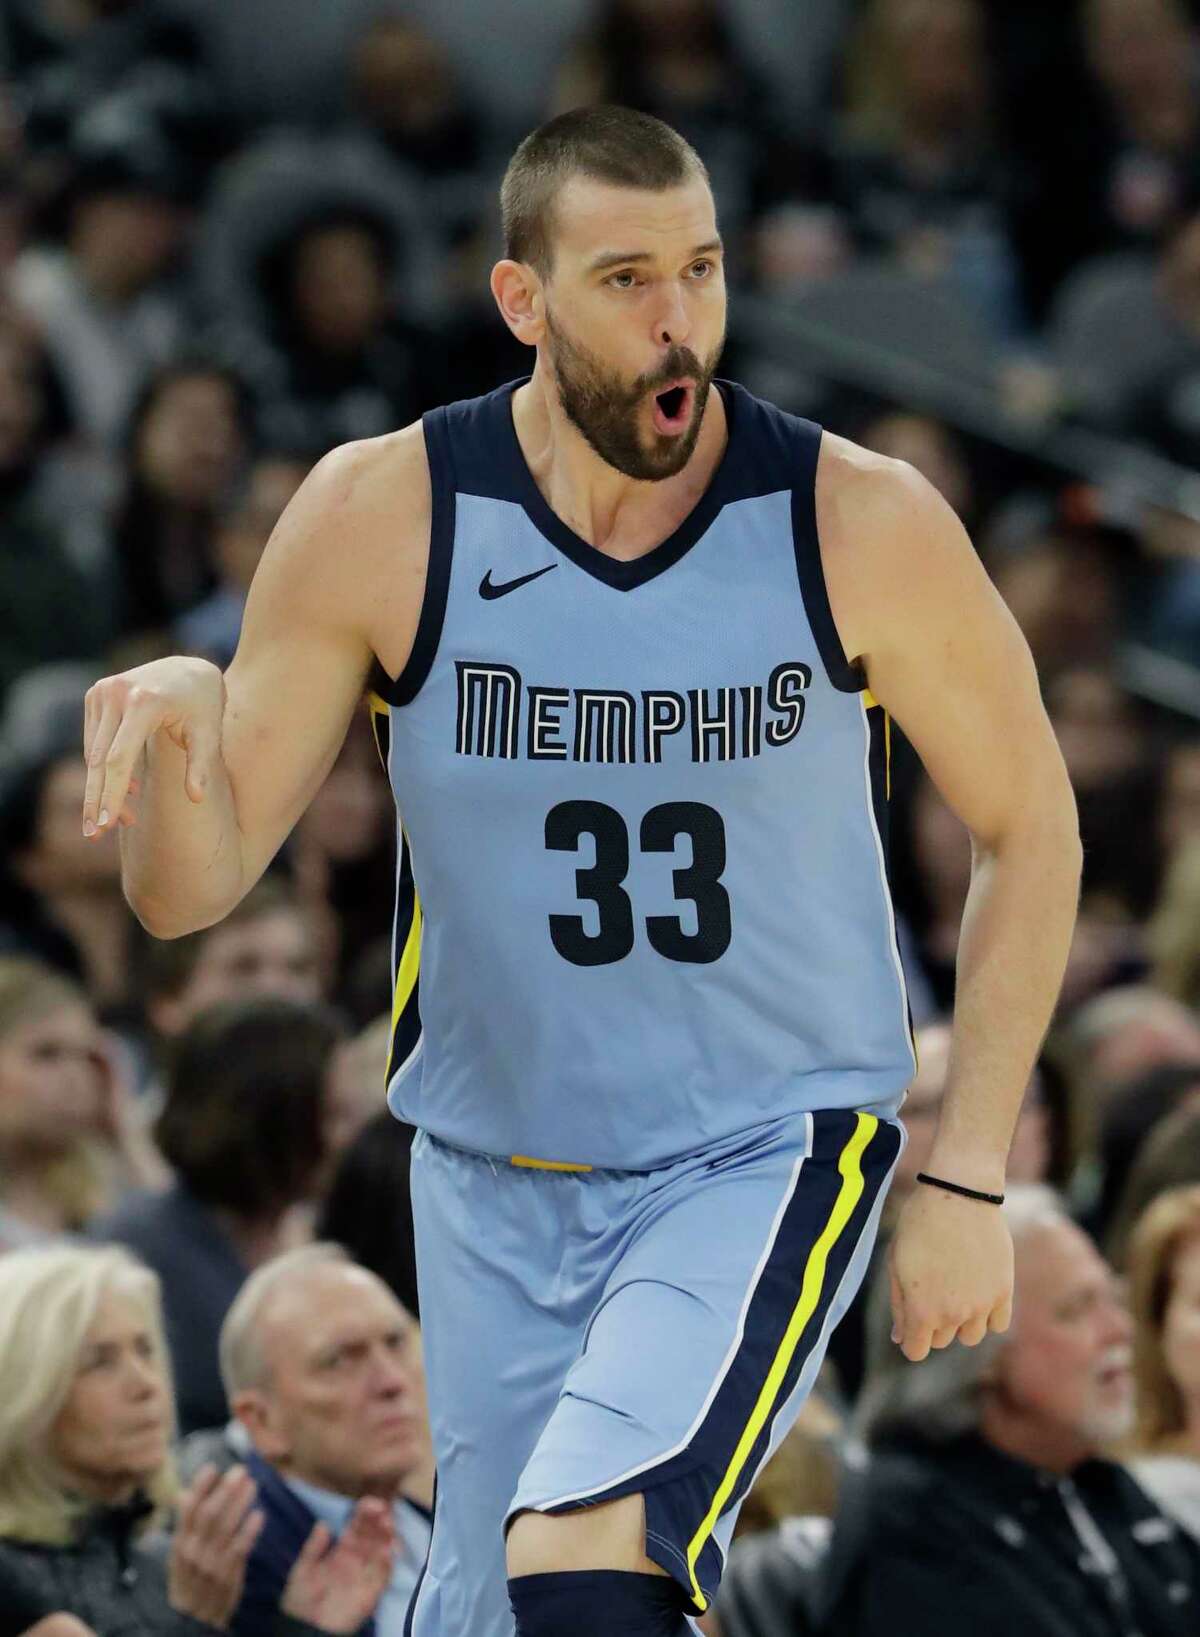 Memphis Grizzlies center Marc Gasol (33) celebrates after he scored against the San Antonio Spurs during the second half of an NBA basketball game, Monday, March 5, 2018, in San Antonio. (AP Photo/Eric Gay)